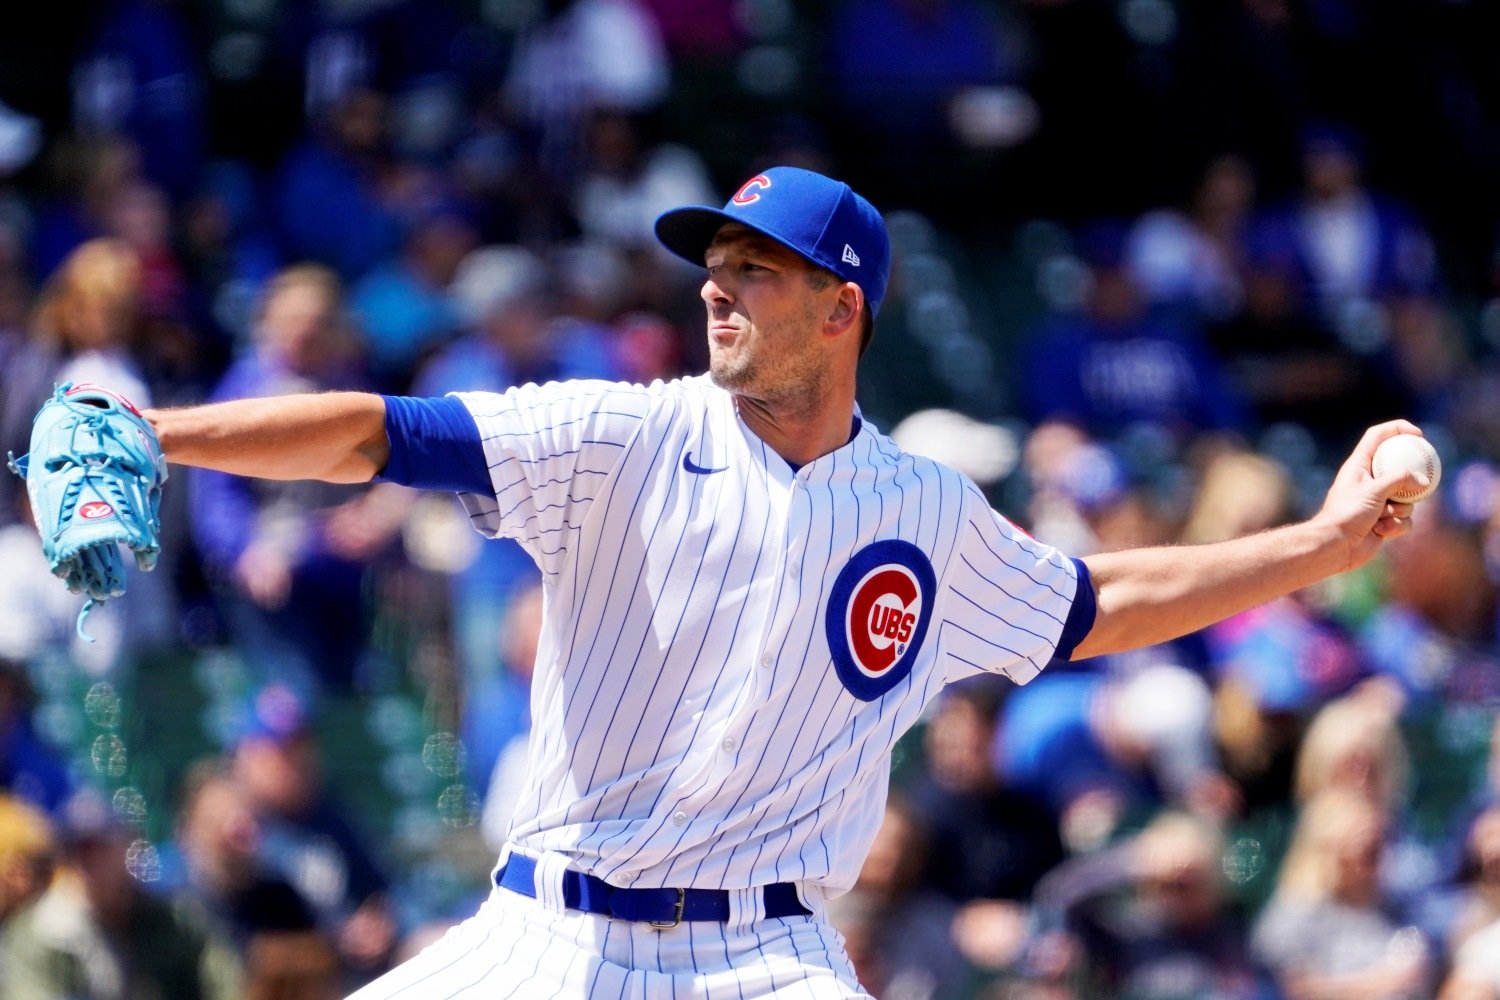 Drew Smyly was determined to make one more start at Wrigley as